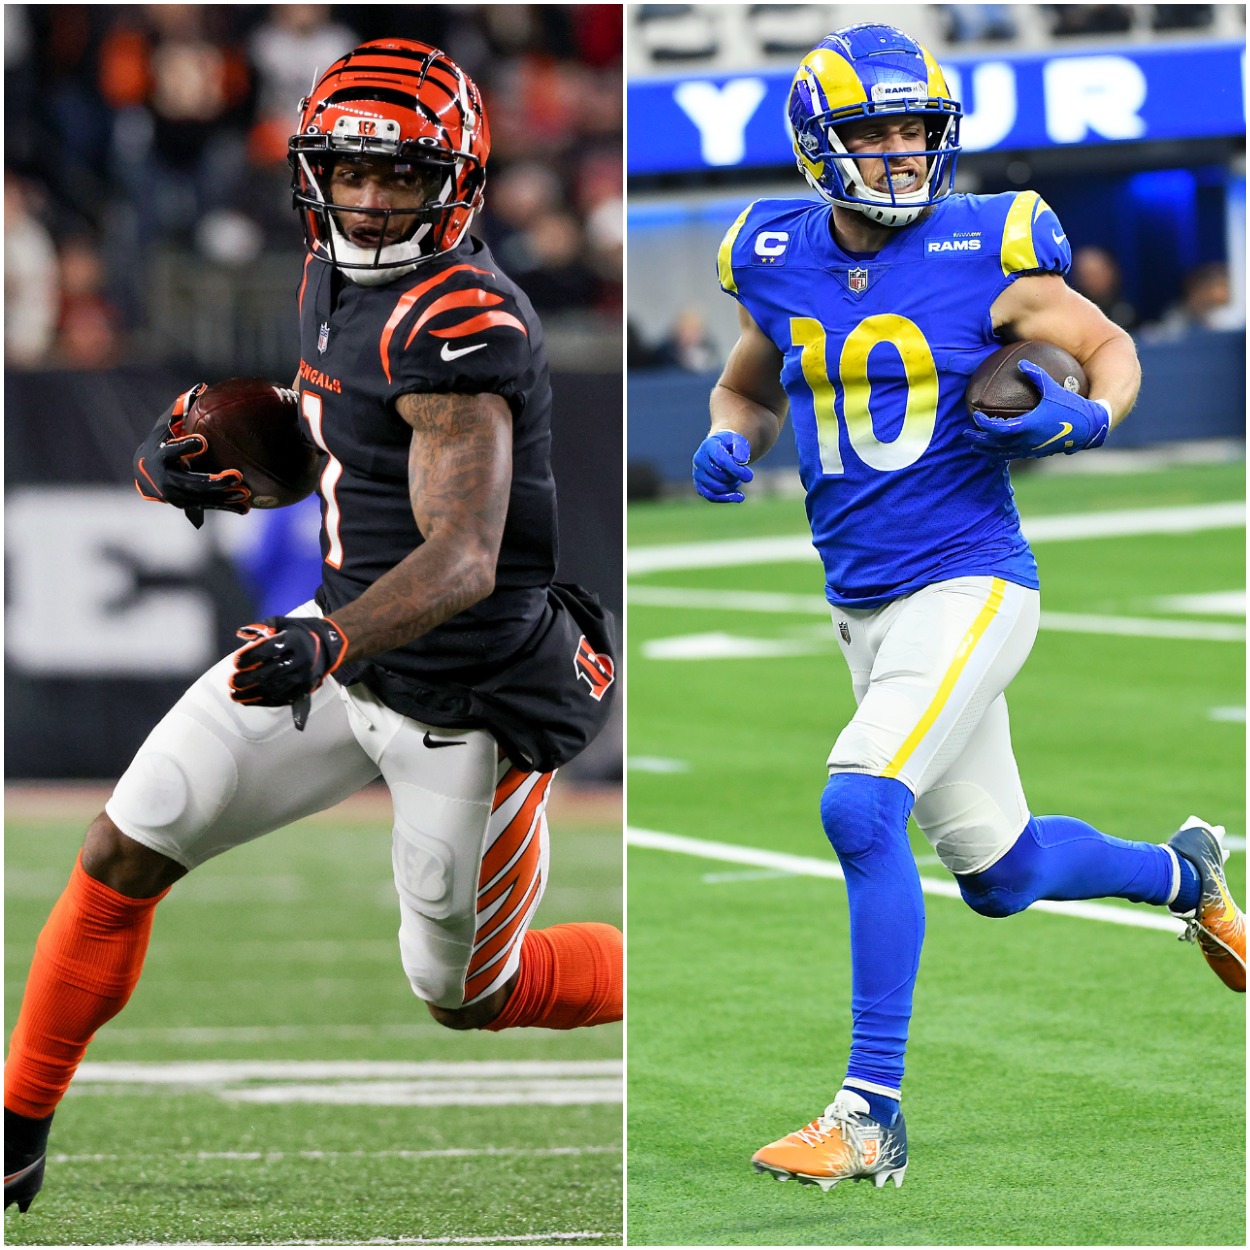 2022 Super Bowl: In a Game Featuring Superstars Like Ja’marr Chase and Cooper Kupp, Which WR Group Has the Edge?